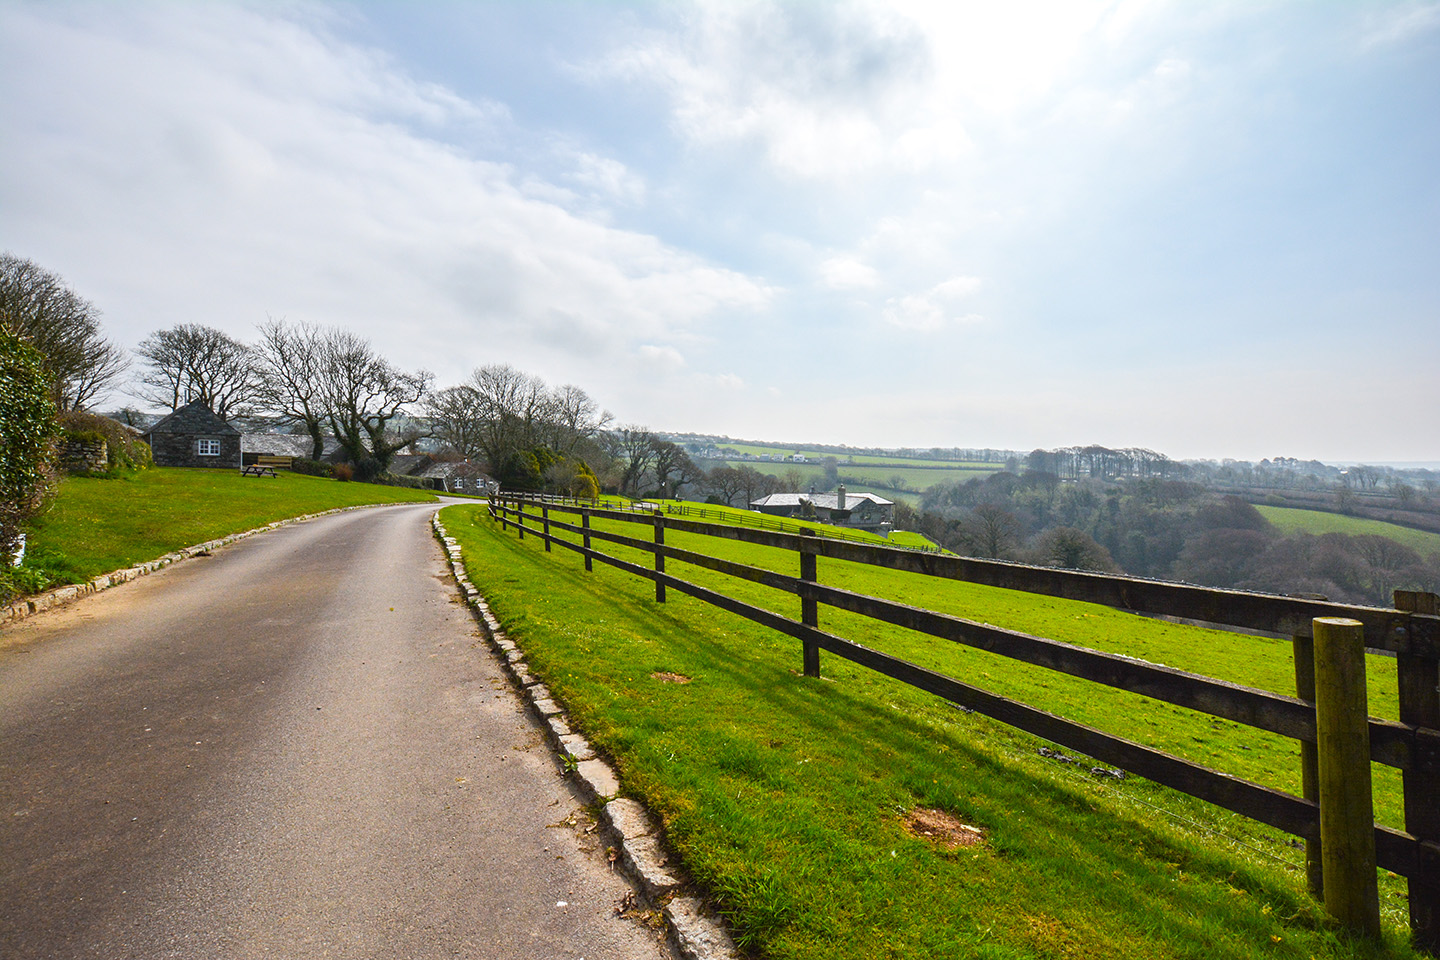 The driveway at Penrose Burden luxury self catering holiday cottage in North Cornwall near Bodmin Moor.jpg